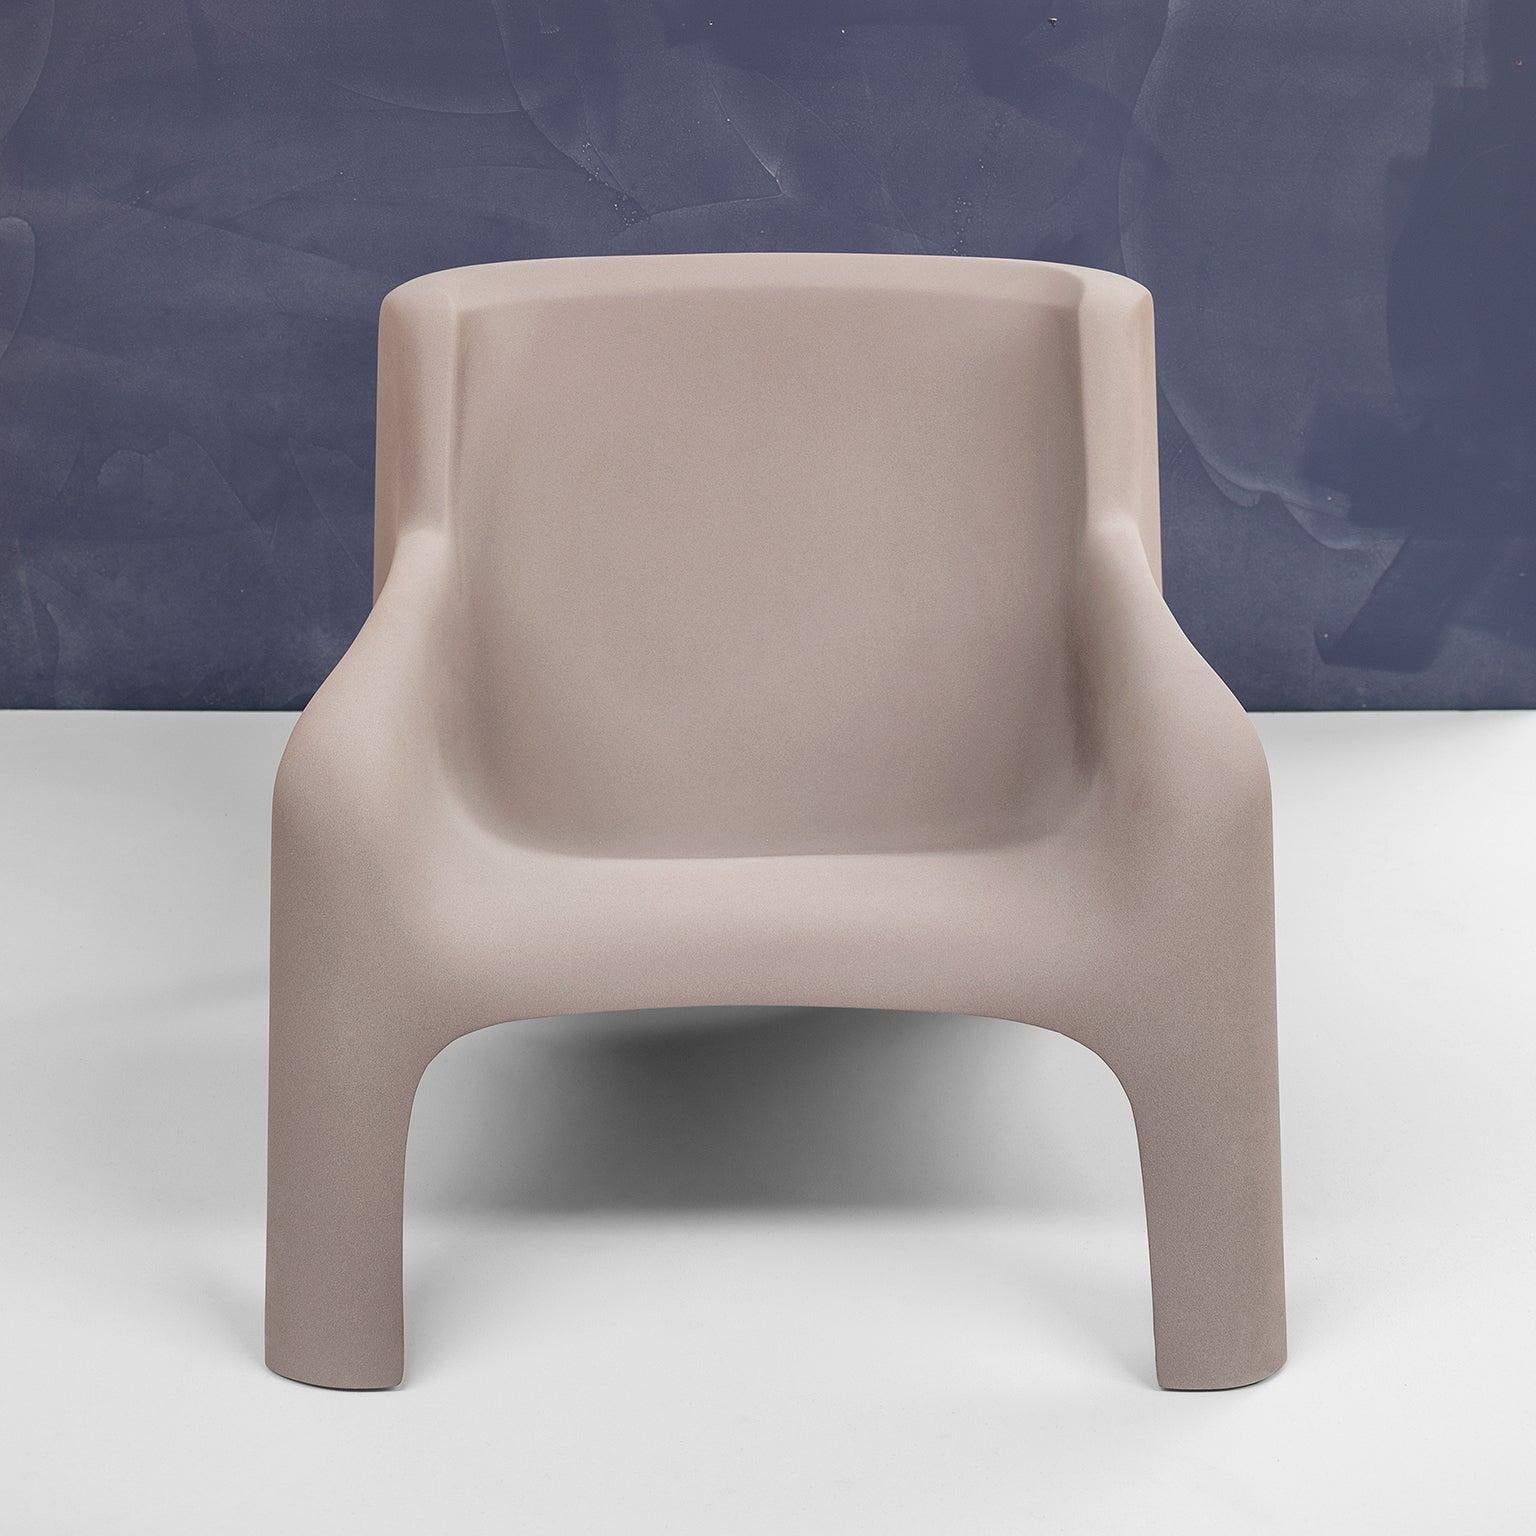 Transparency Matters collection

Armchair, in fiberglass, production by Arflex, Designer Carlo Bartoli, 1960-1969.
Vintage piece has been transformed in to a contemporary item with matte coat.

Color pink light. Size: cm 78 x 81 x 84.
Also